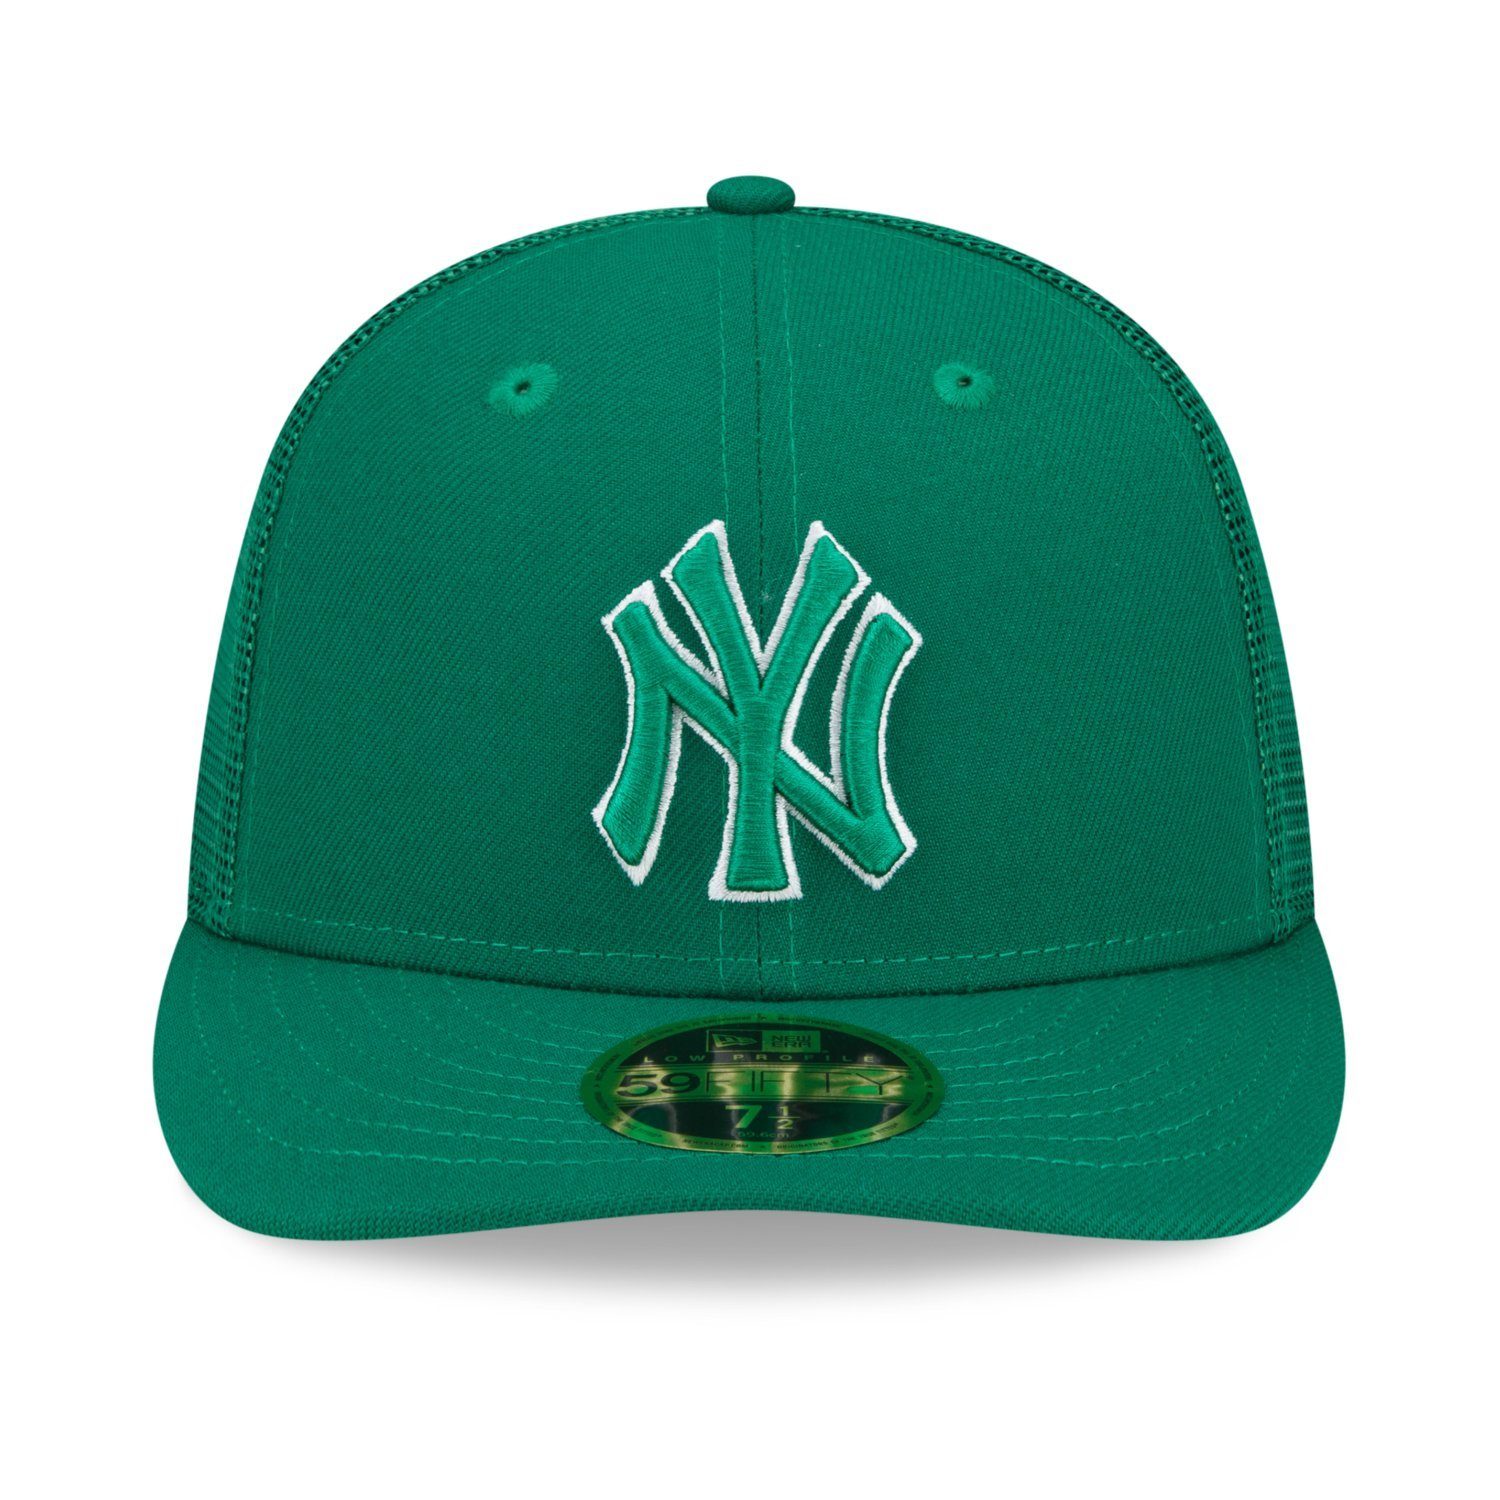 Era PATRICK’S Fitted Low 59Fifty Cap Profile New New York DAY ST.